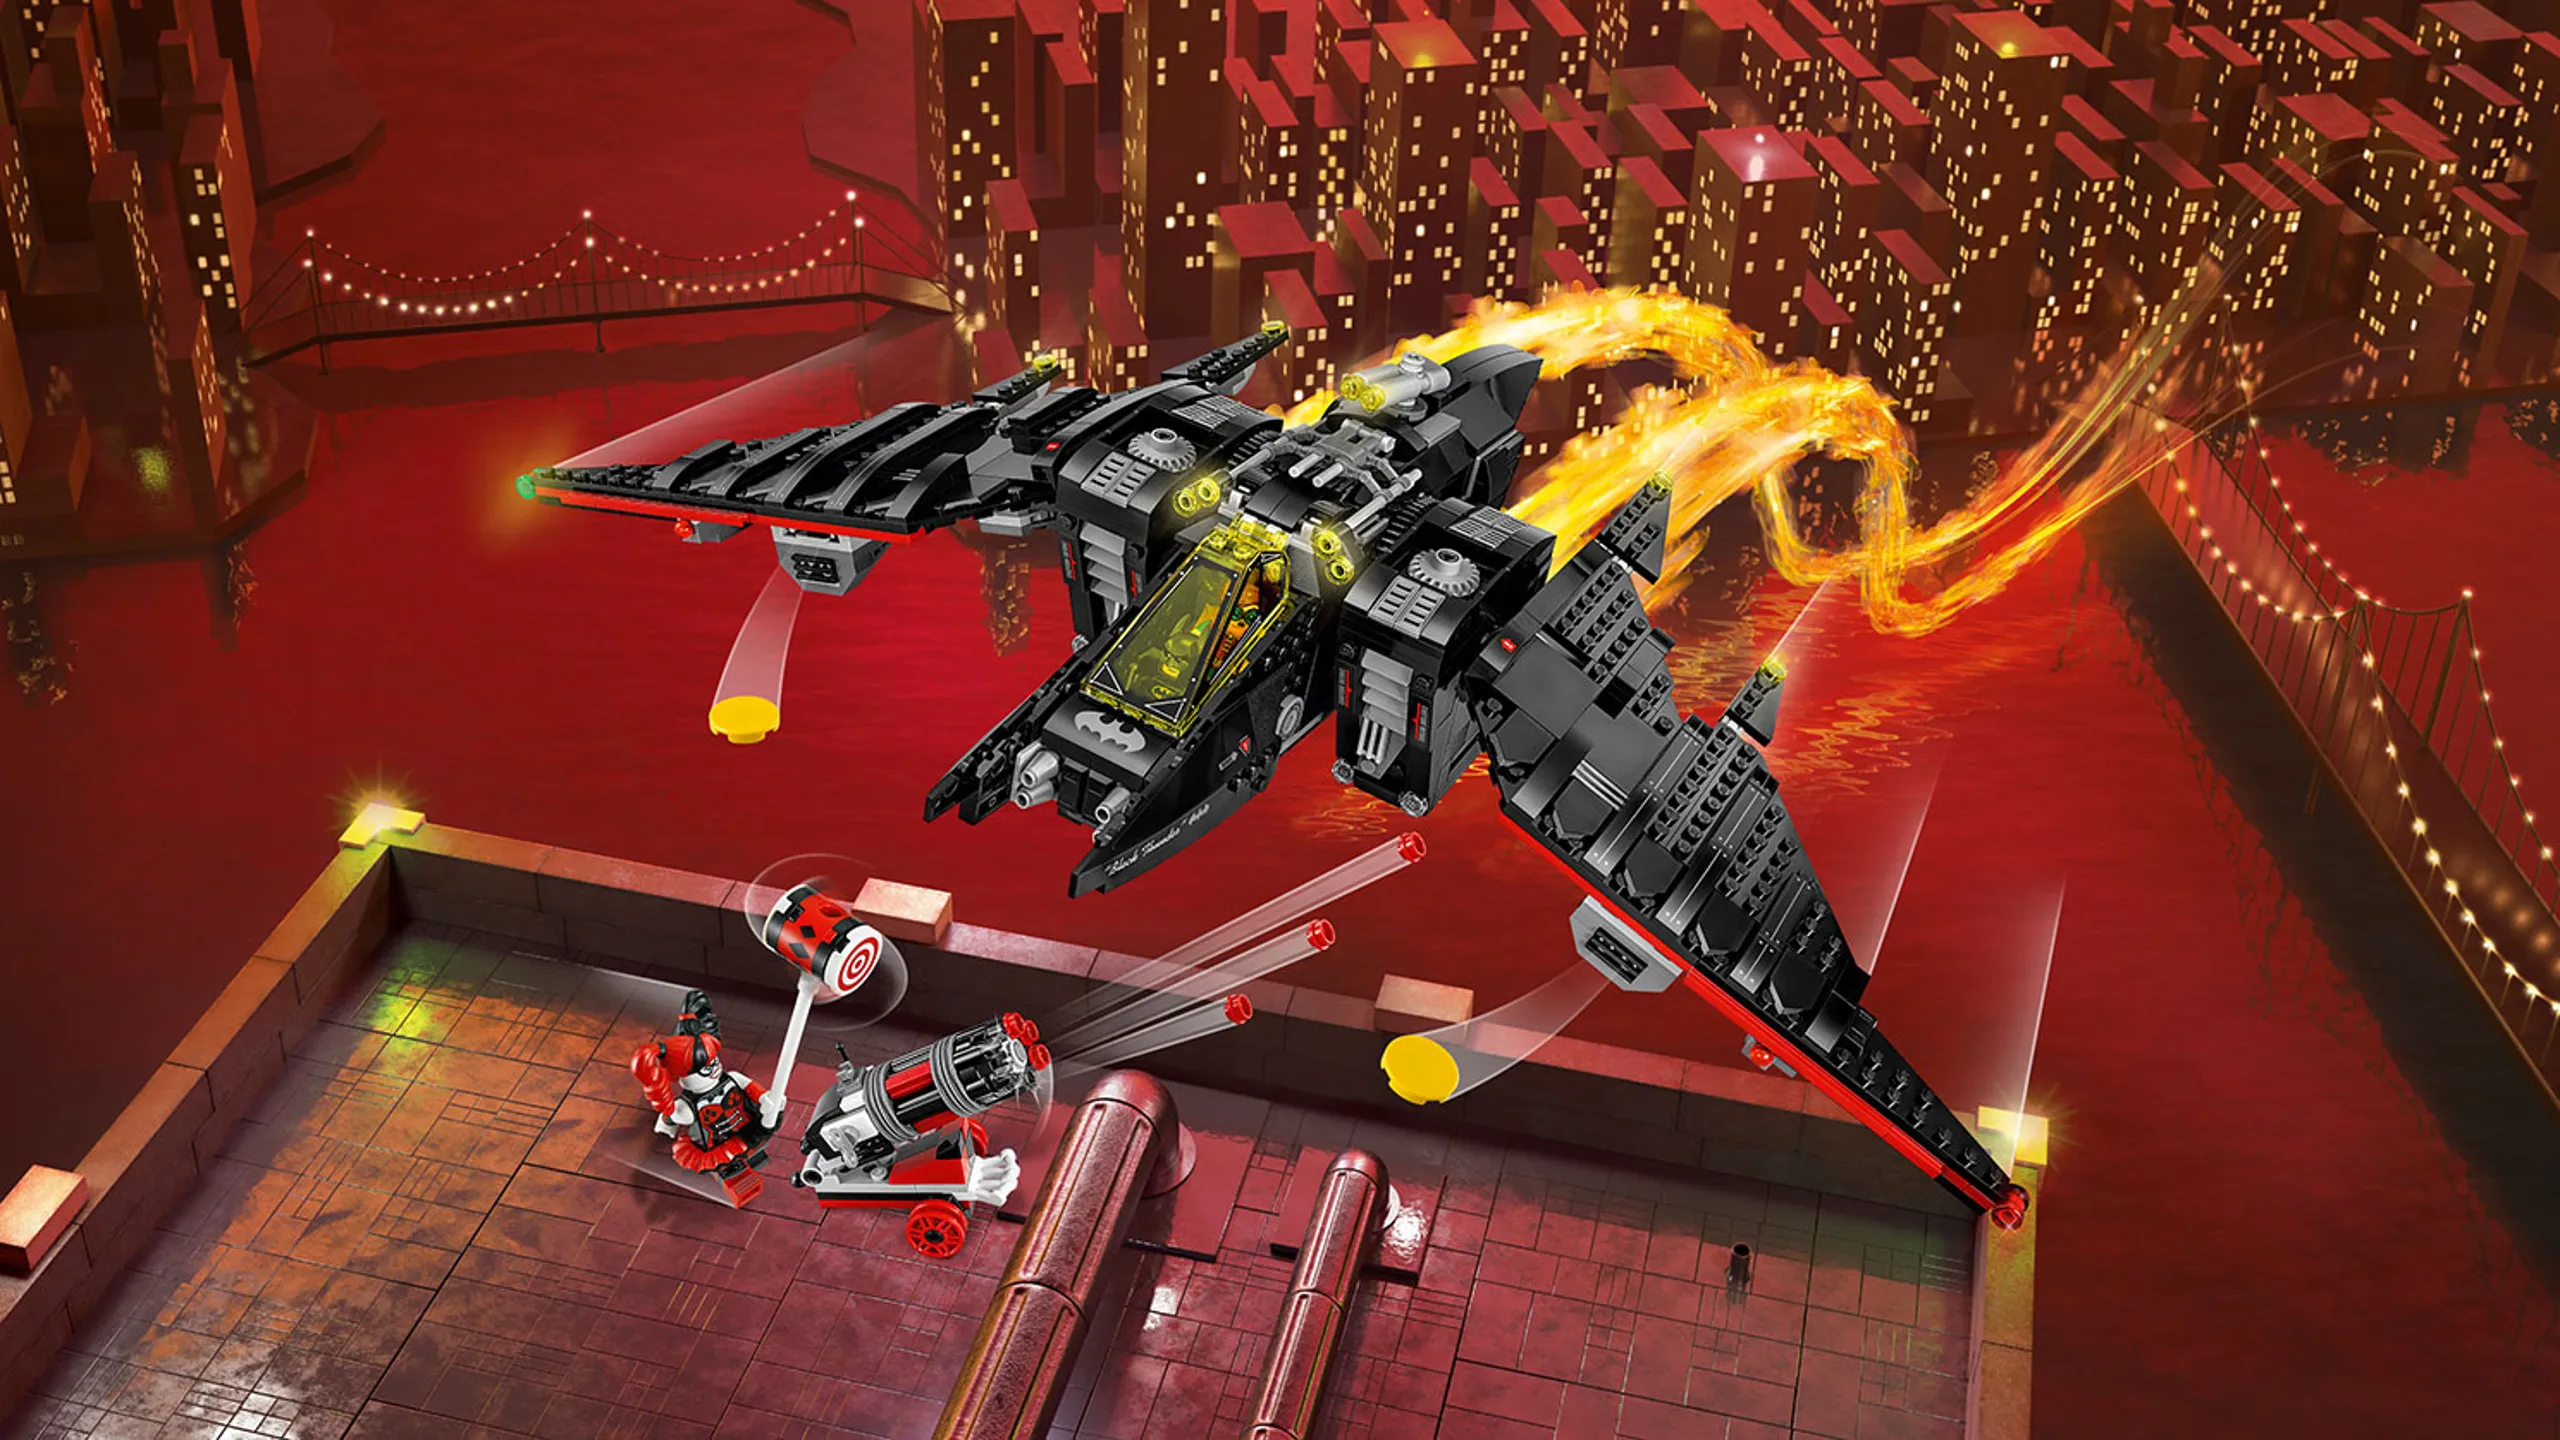 LEGO Batman Movie the Batwing - 70916 - Harley Quinn fires her cannon at Batman and Robin who are cruising in the Batwing.